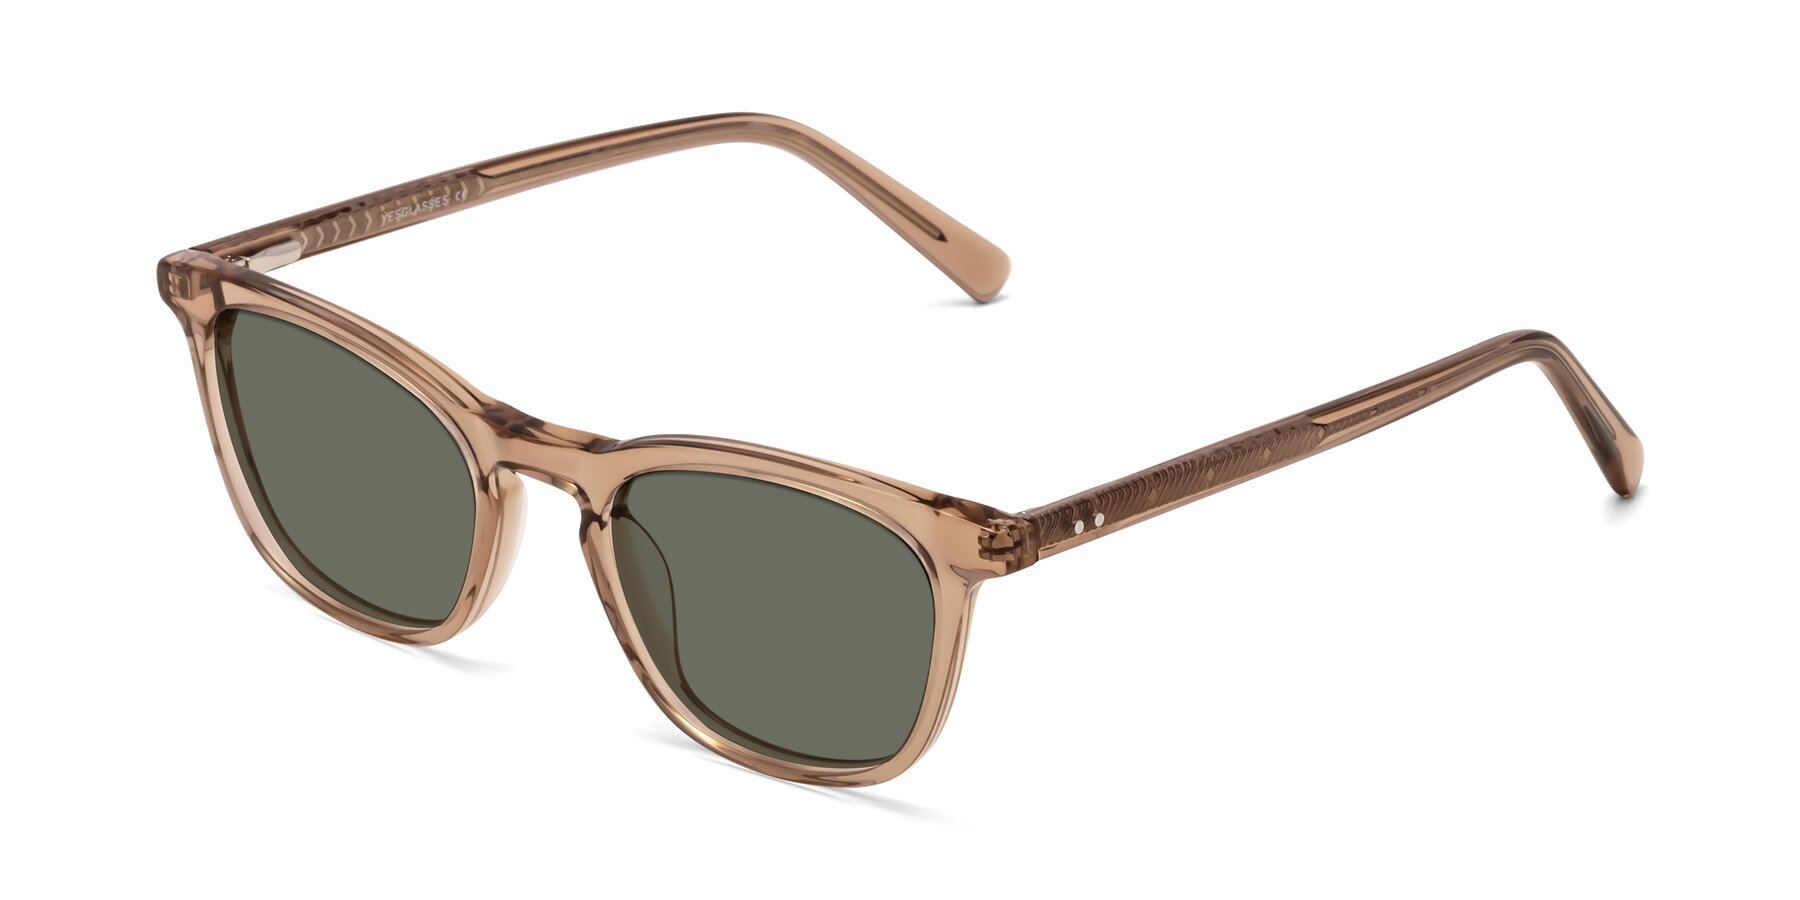 Angle of Loris in Light Brown with Gray Polarized Lenses